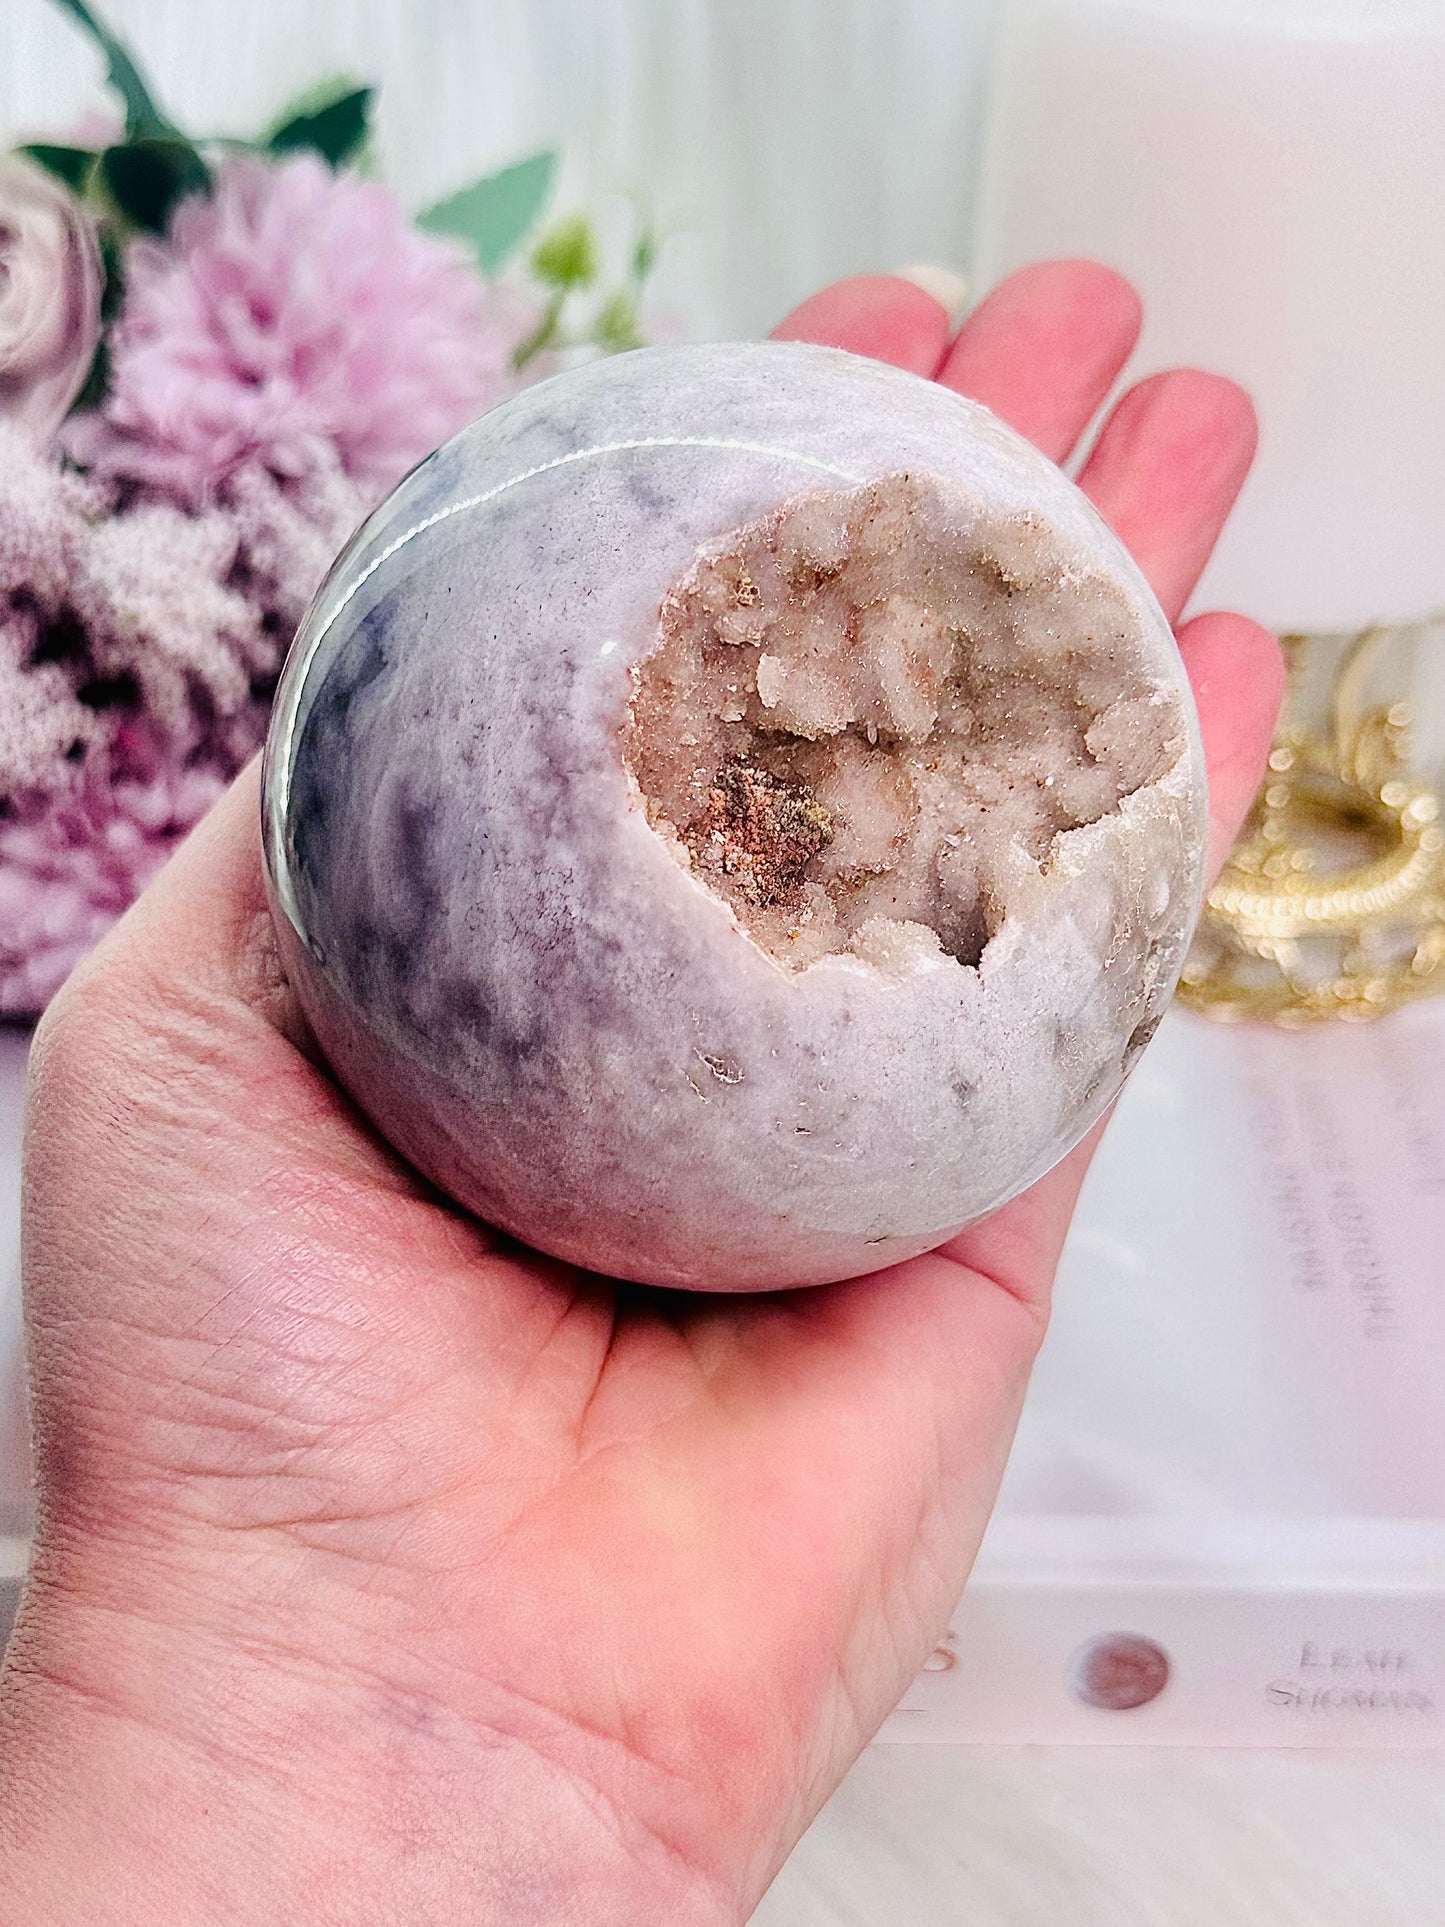 Stunning Large 574gram Pink Amethyst Druzy Sphere on Stand From Brazil (Glass stand in pic is display only)